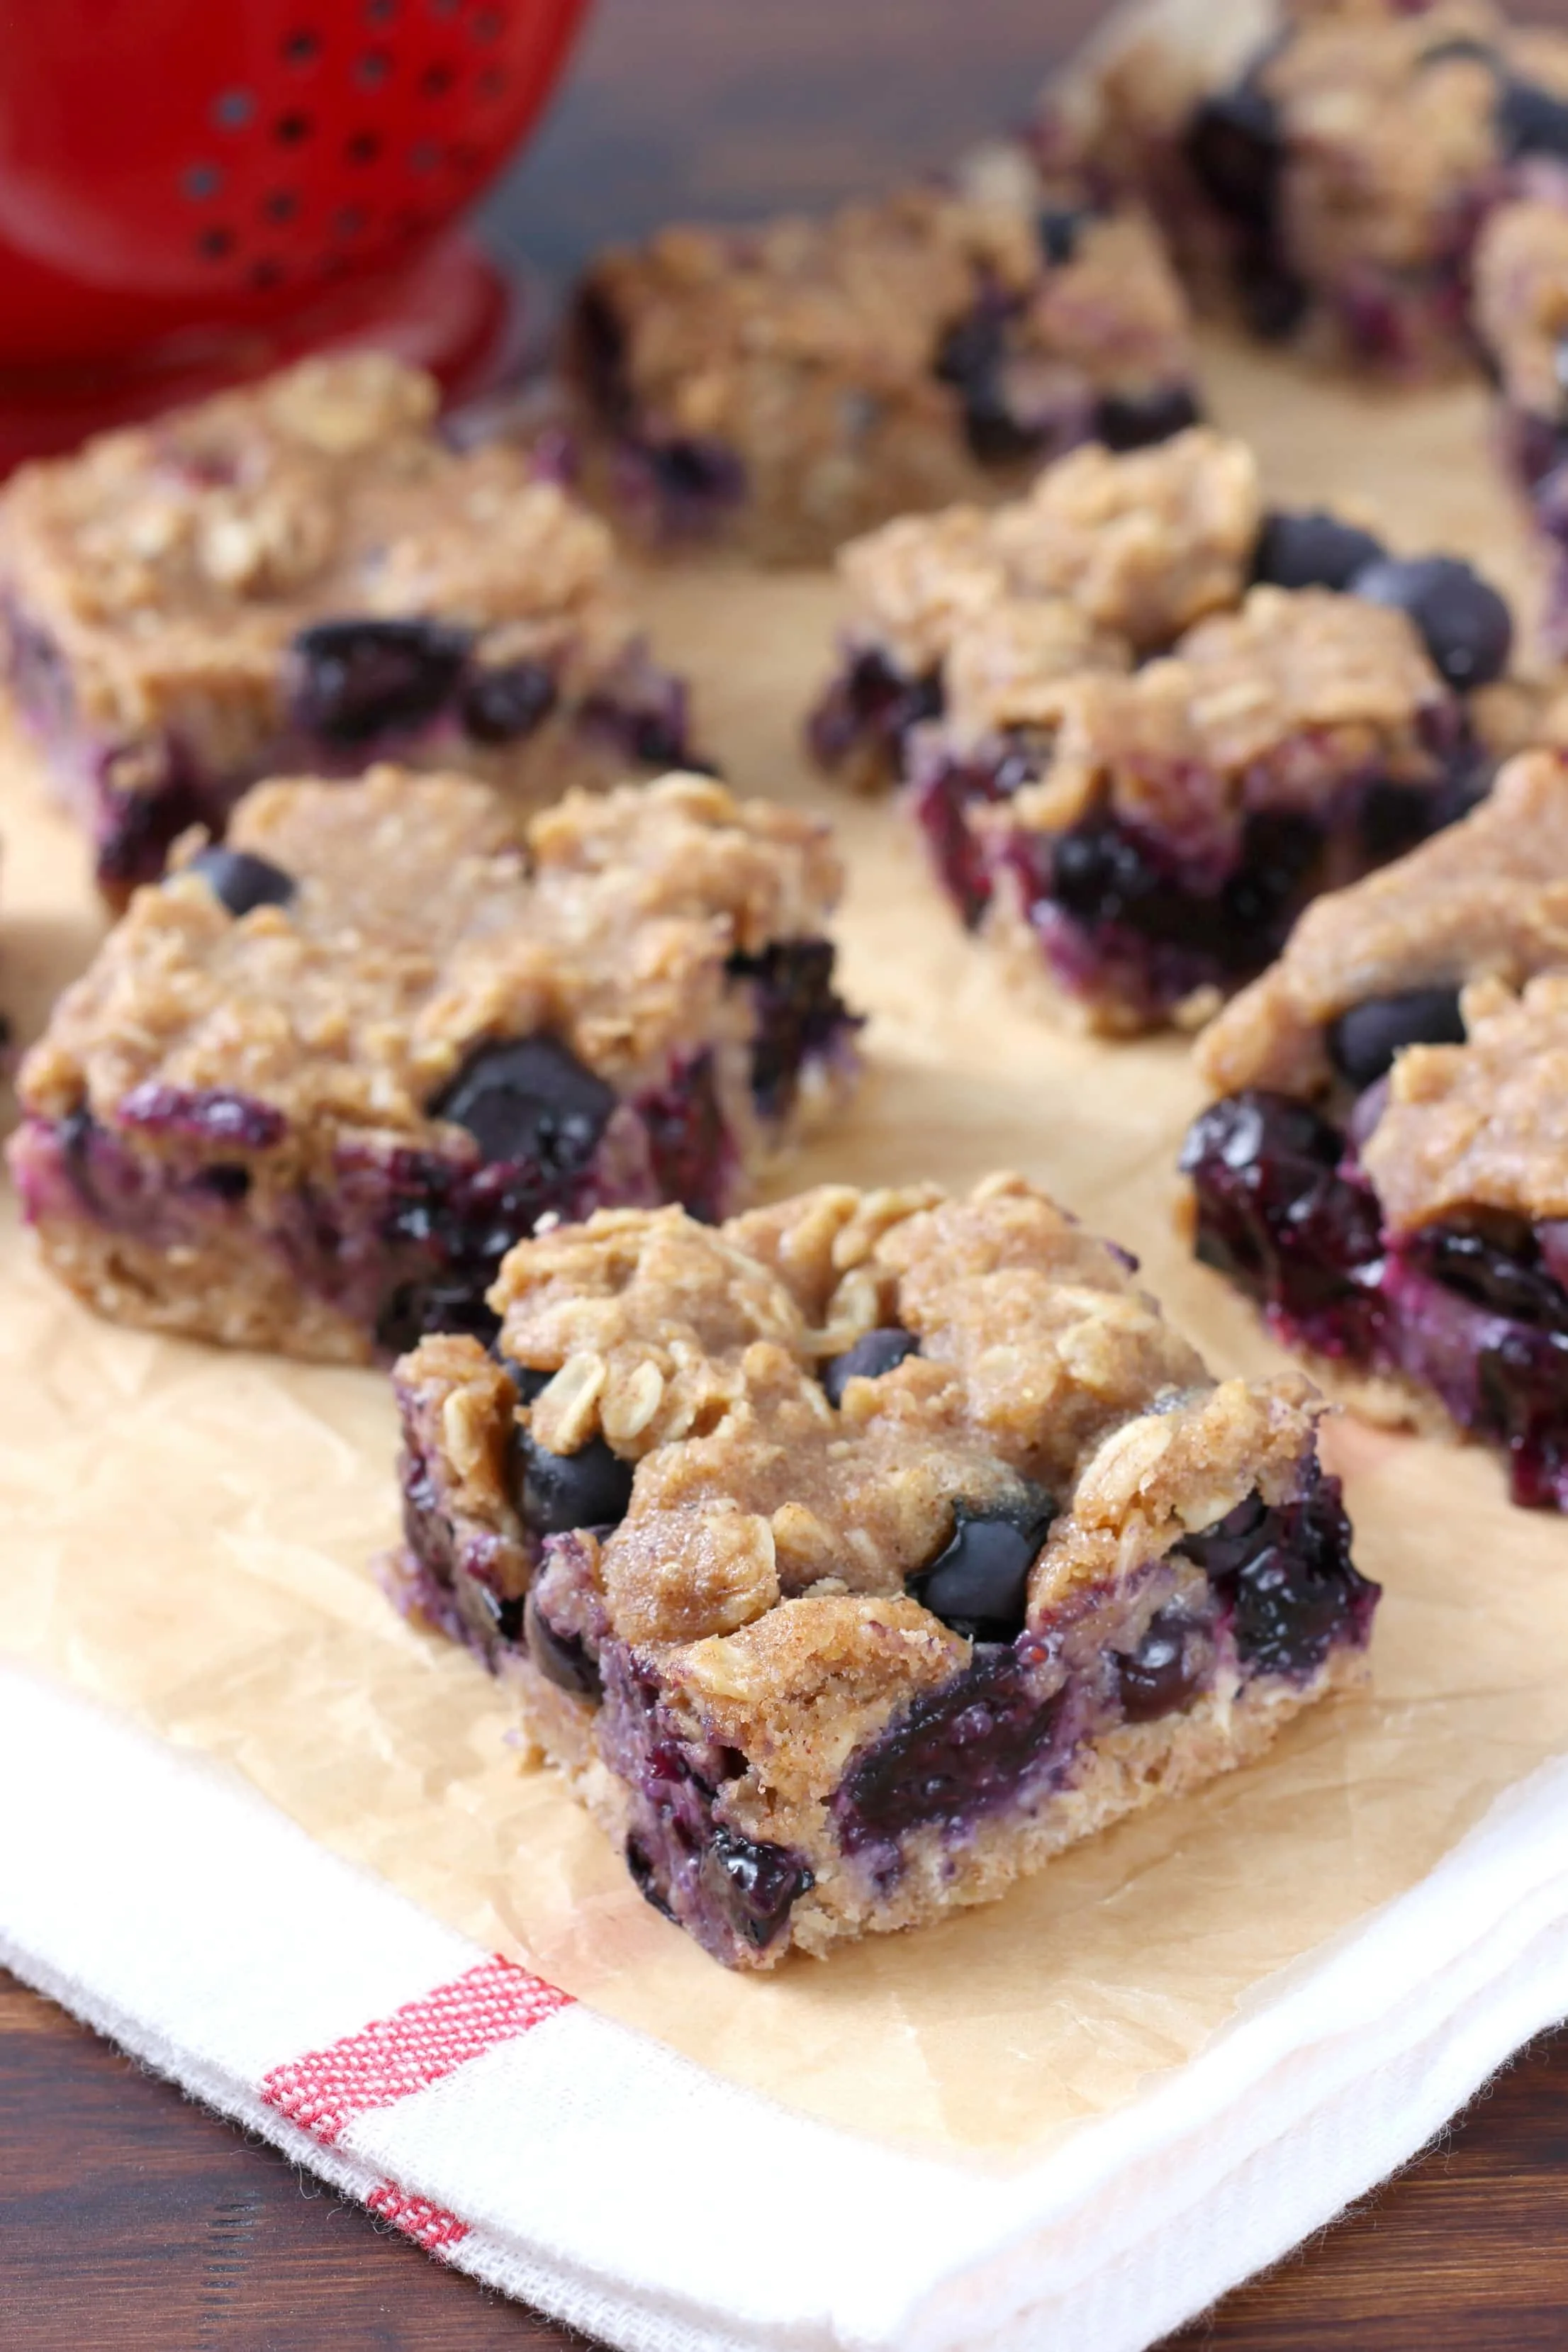 Blueberry Oat Snack Bars Recipe from A Kitchen Addiction